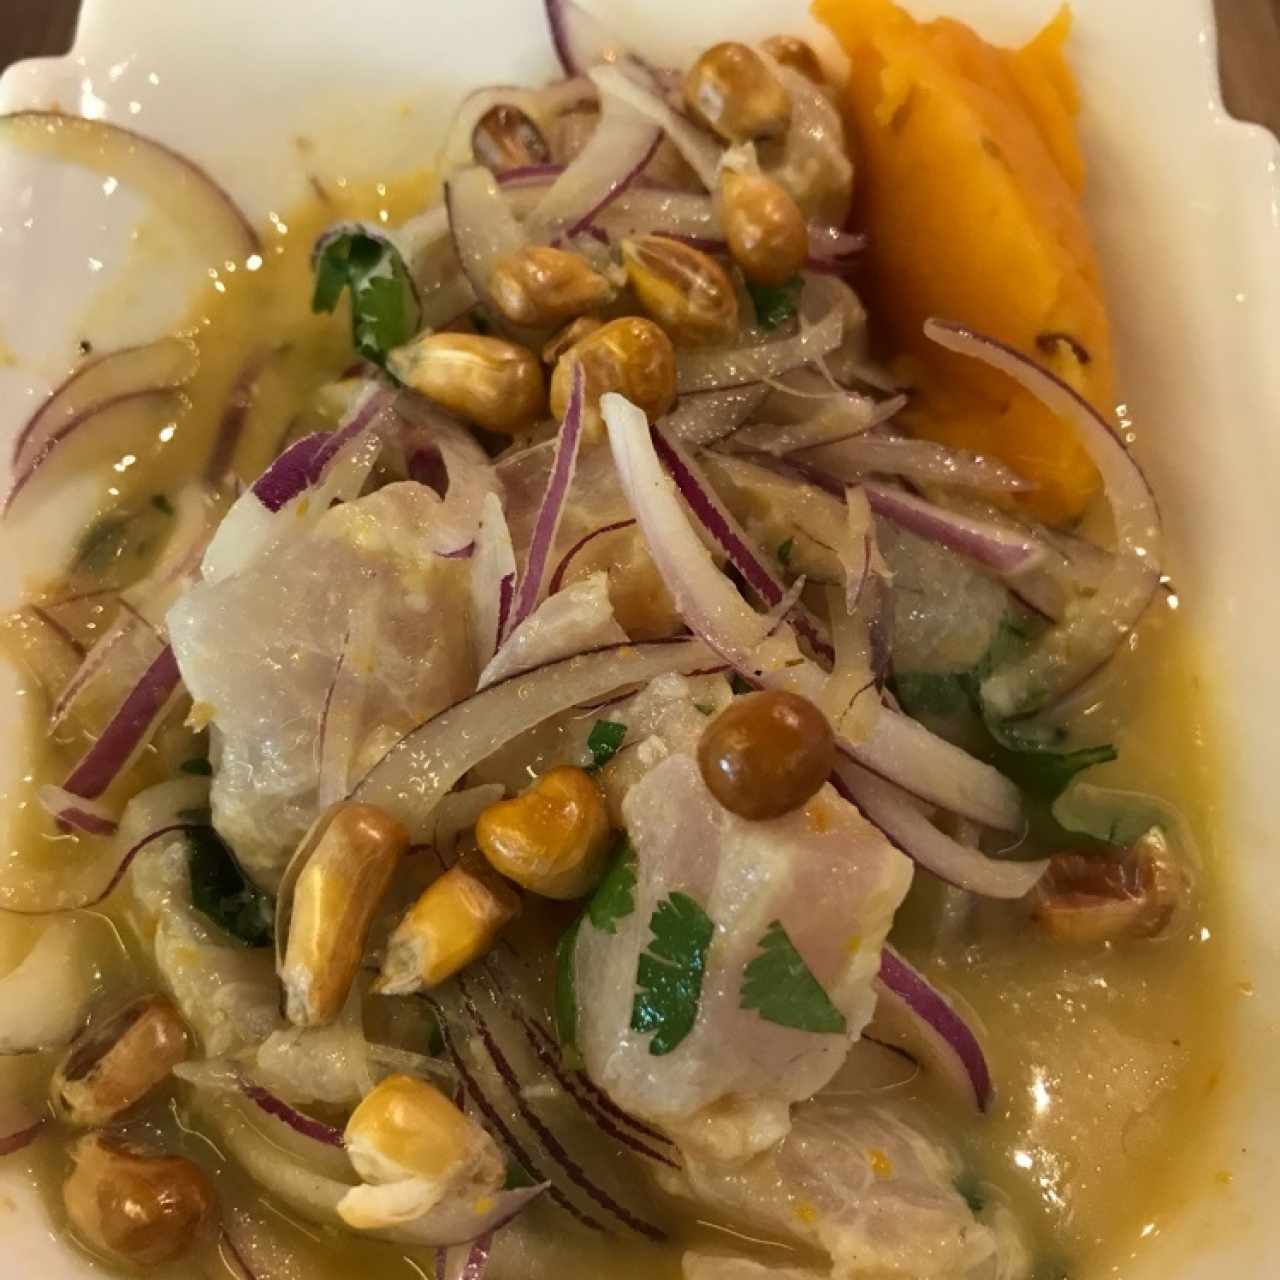 Ceviches - Ceviche limeño